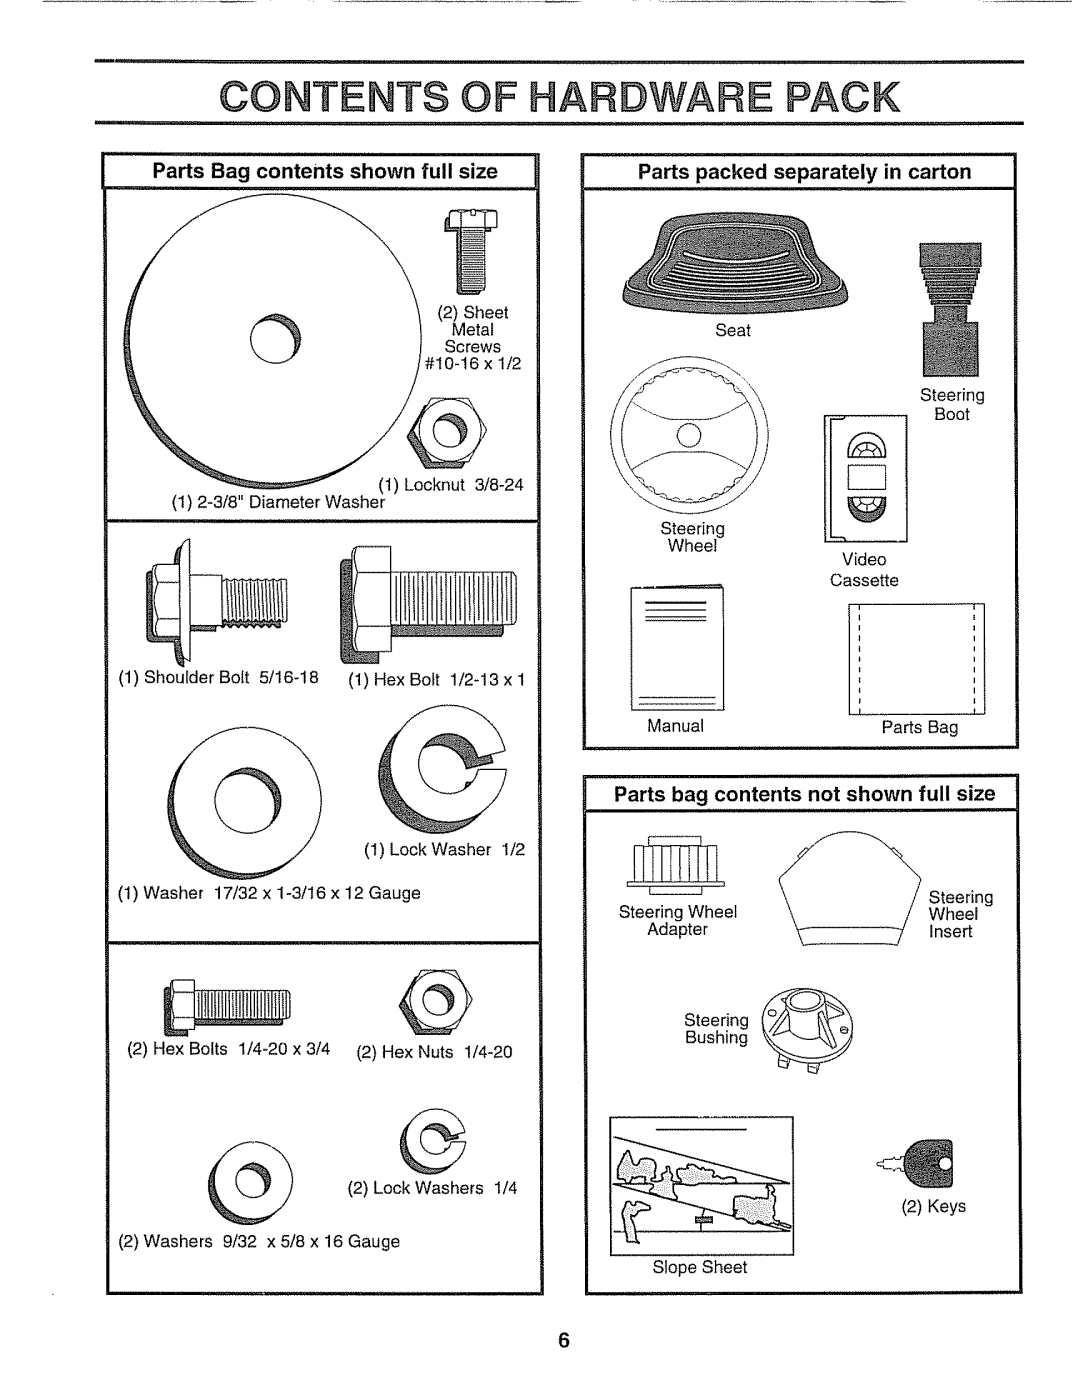 Craftsman 917.25651 Contents Of Hardware Pack, Parts packed separately in carton, Parts bag contents not shown full size 